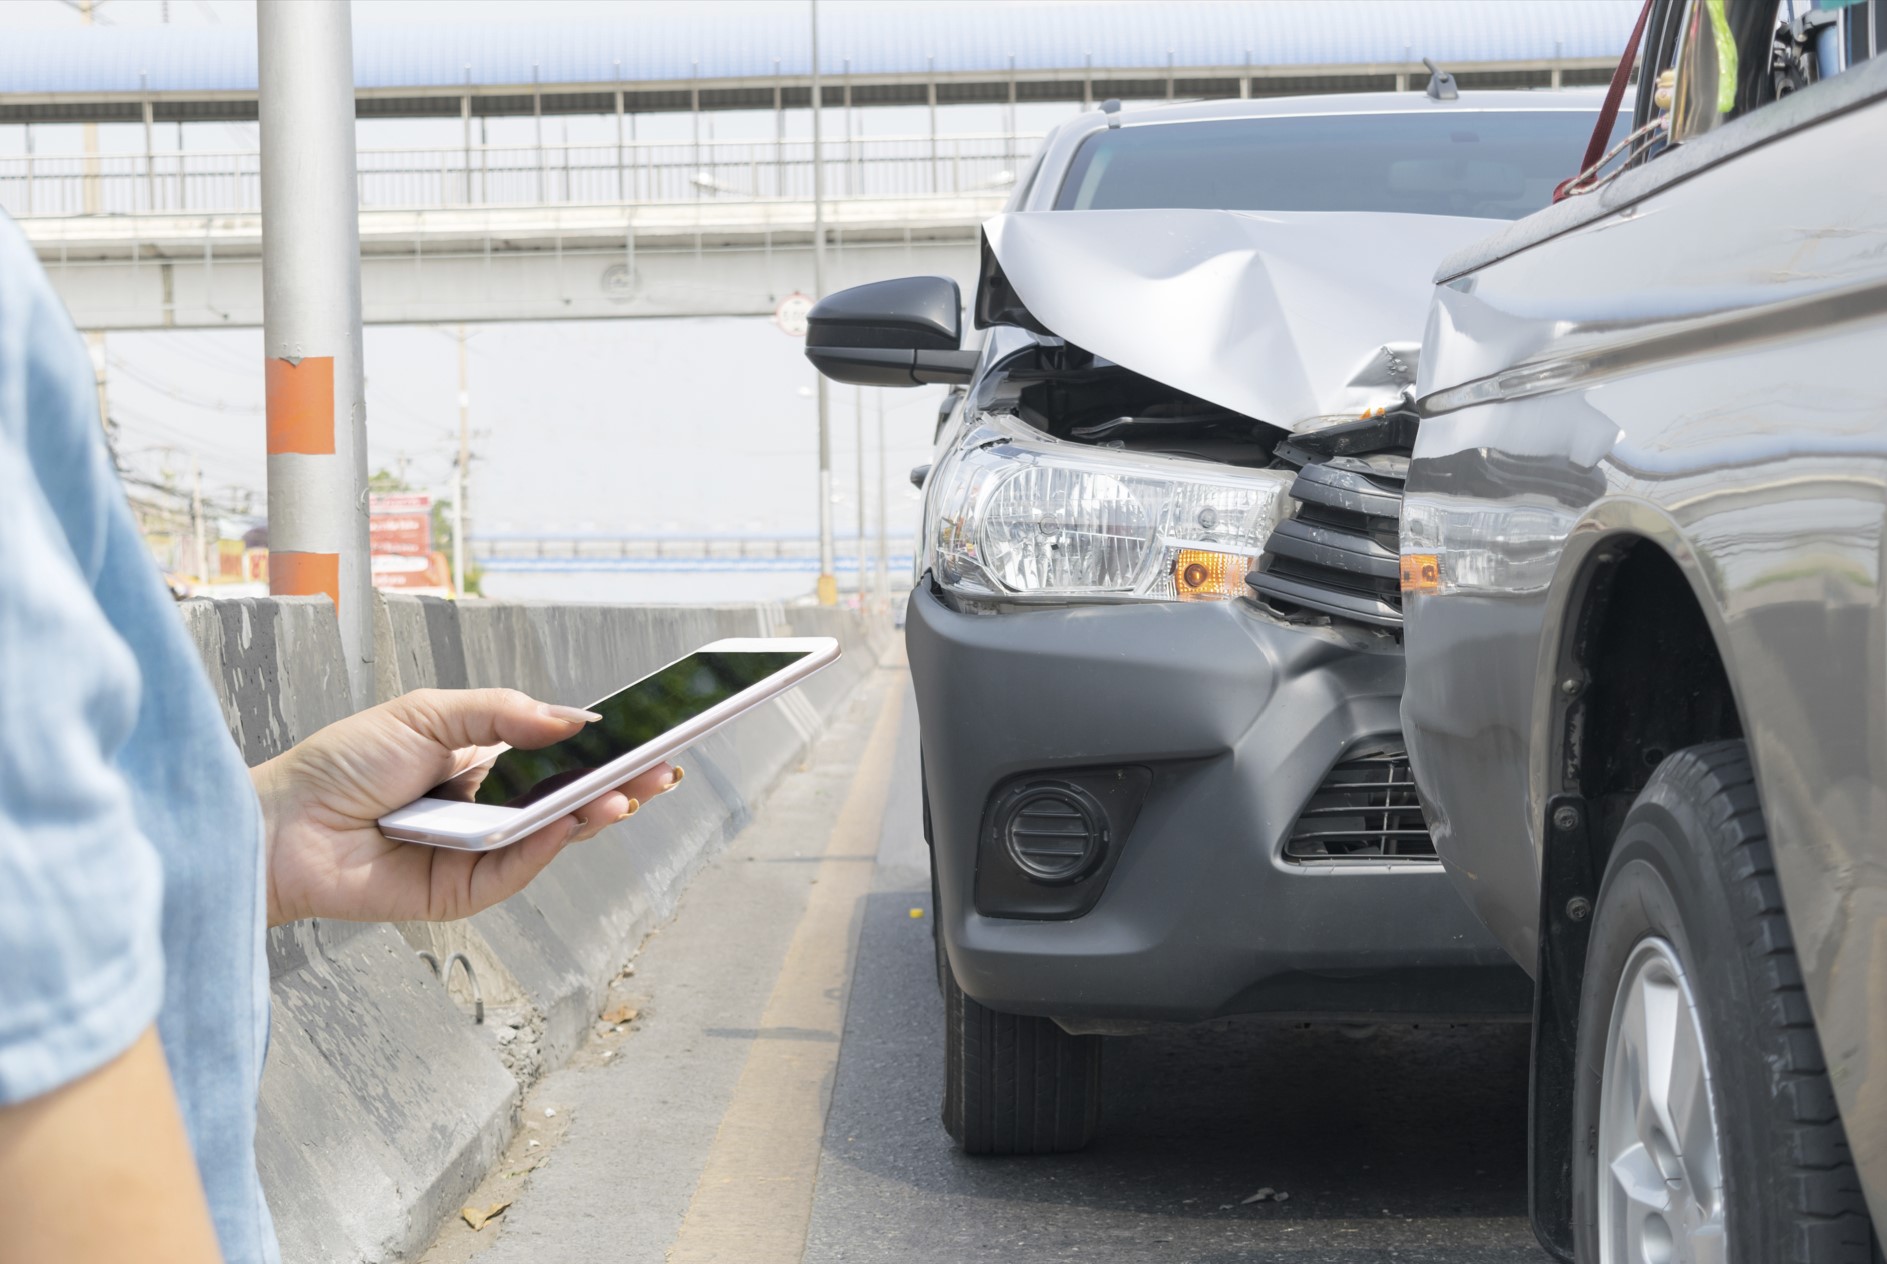 Vital Steps to Take After a Car Accident